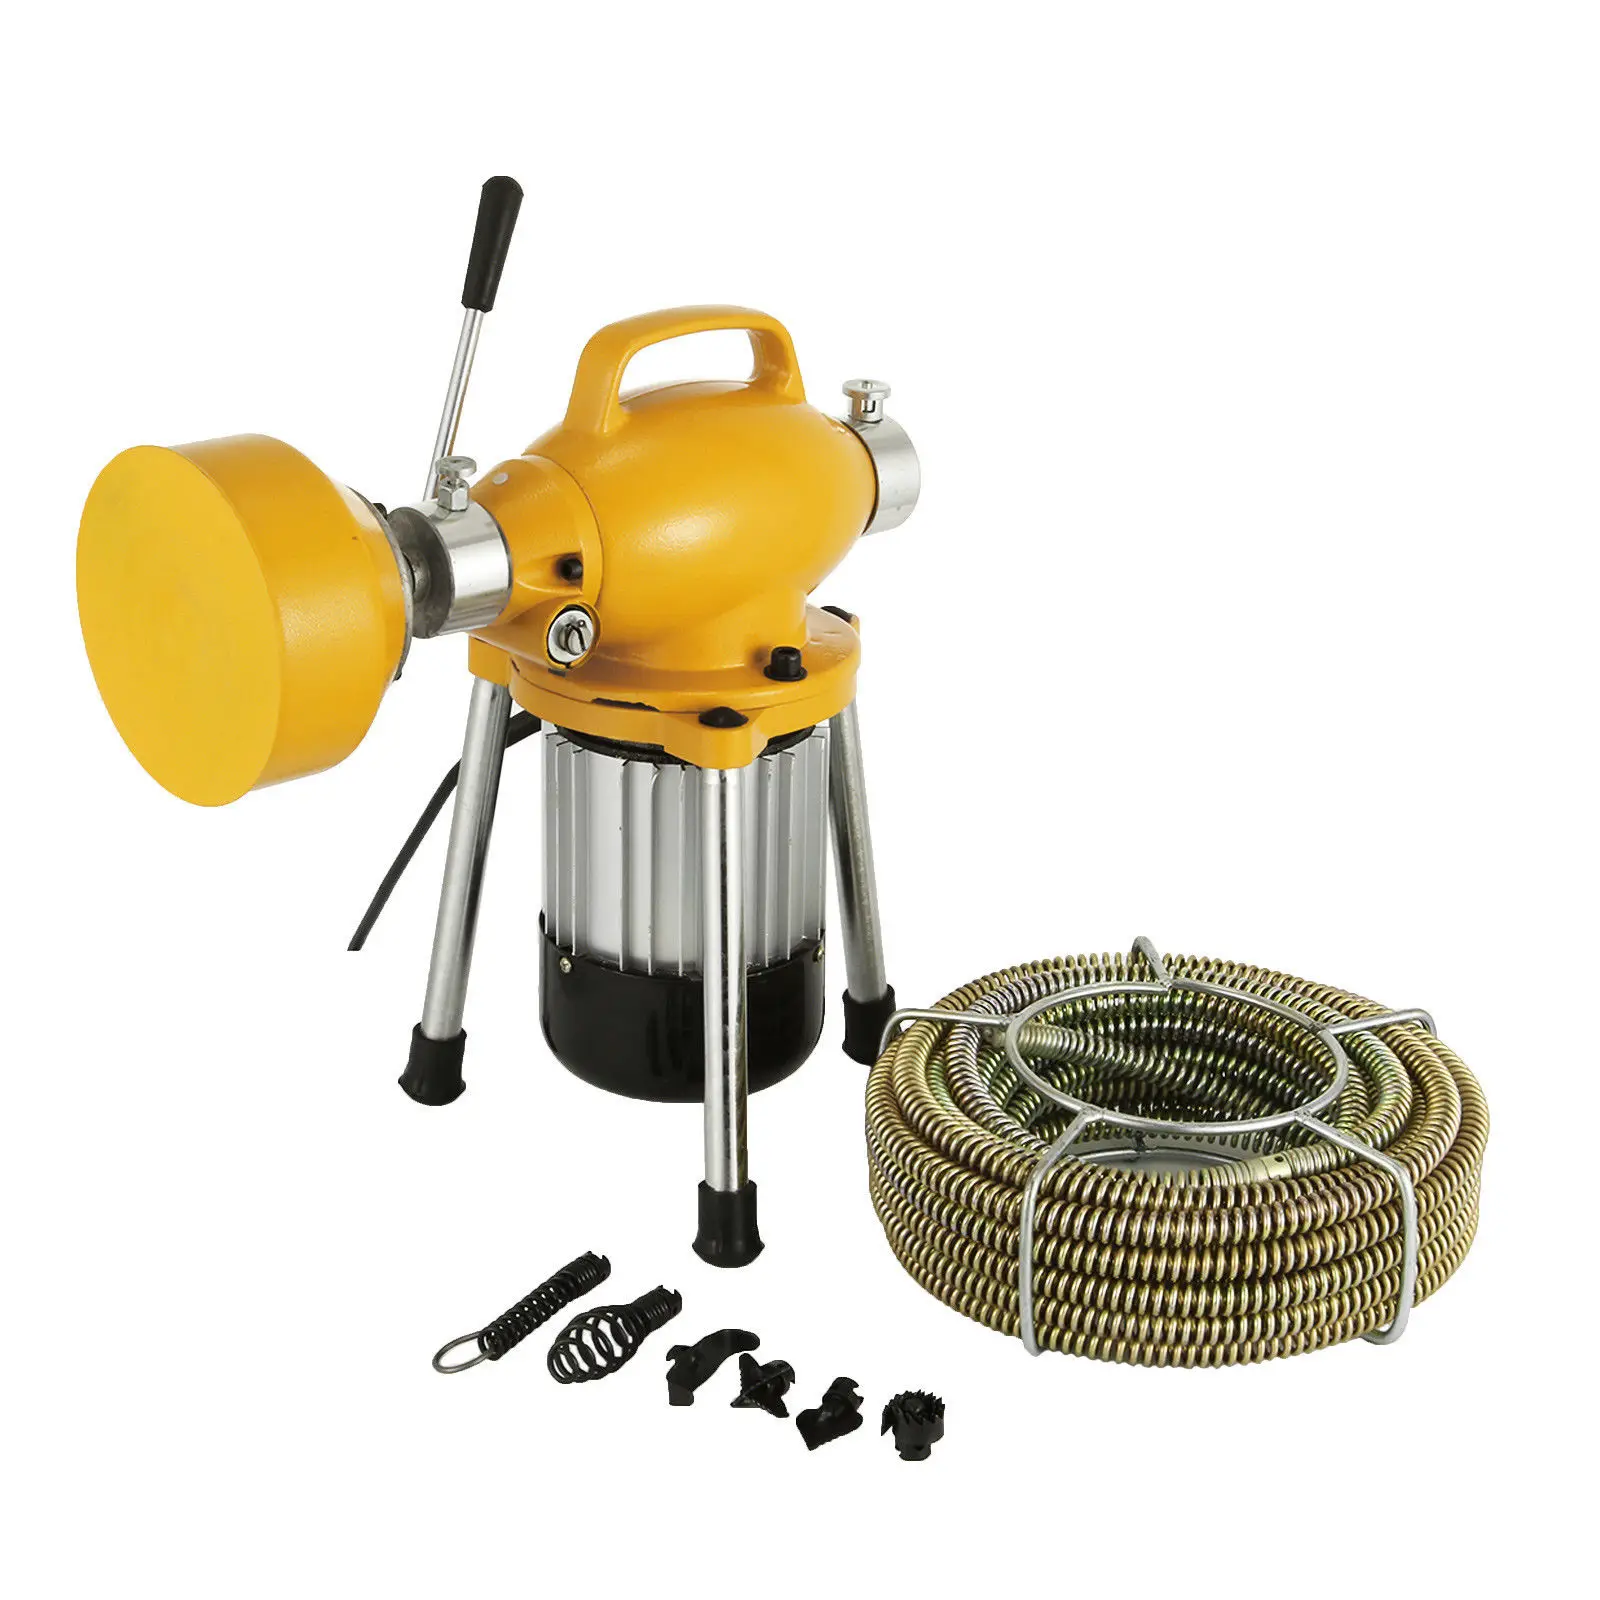 Drain Cleaner Machine Sectional Drain Cleaner 400W 20m x 16mm Drain Auger  Cleaning Machine HX-75